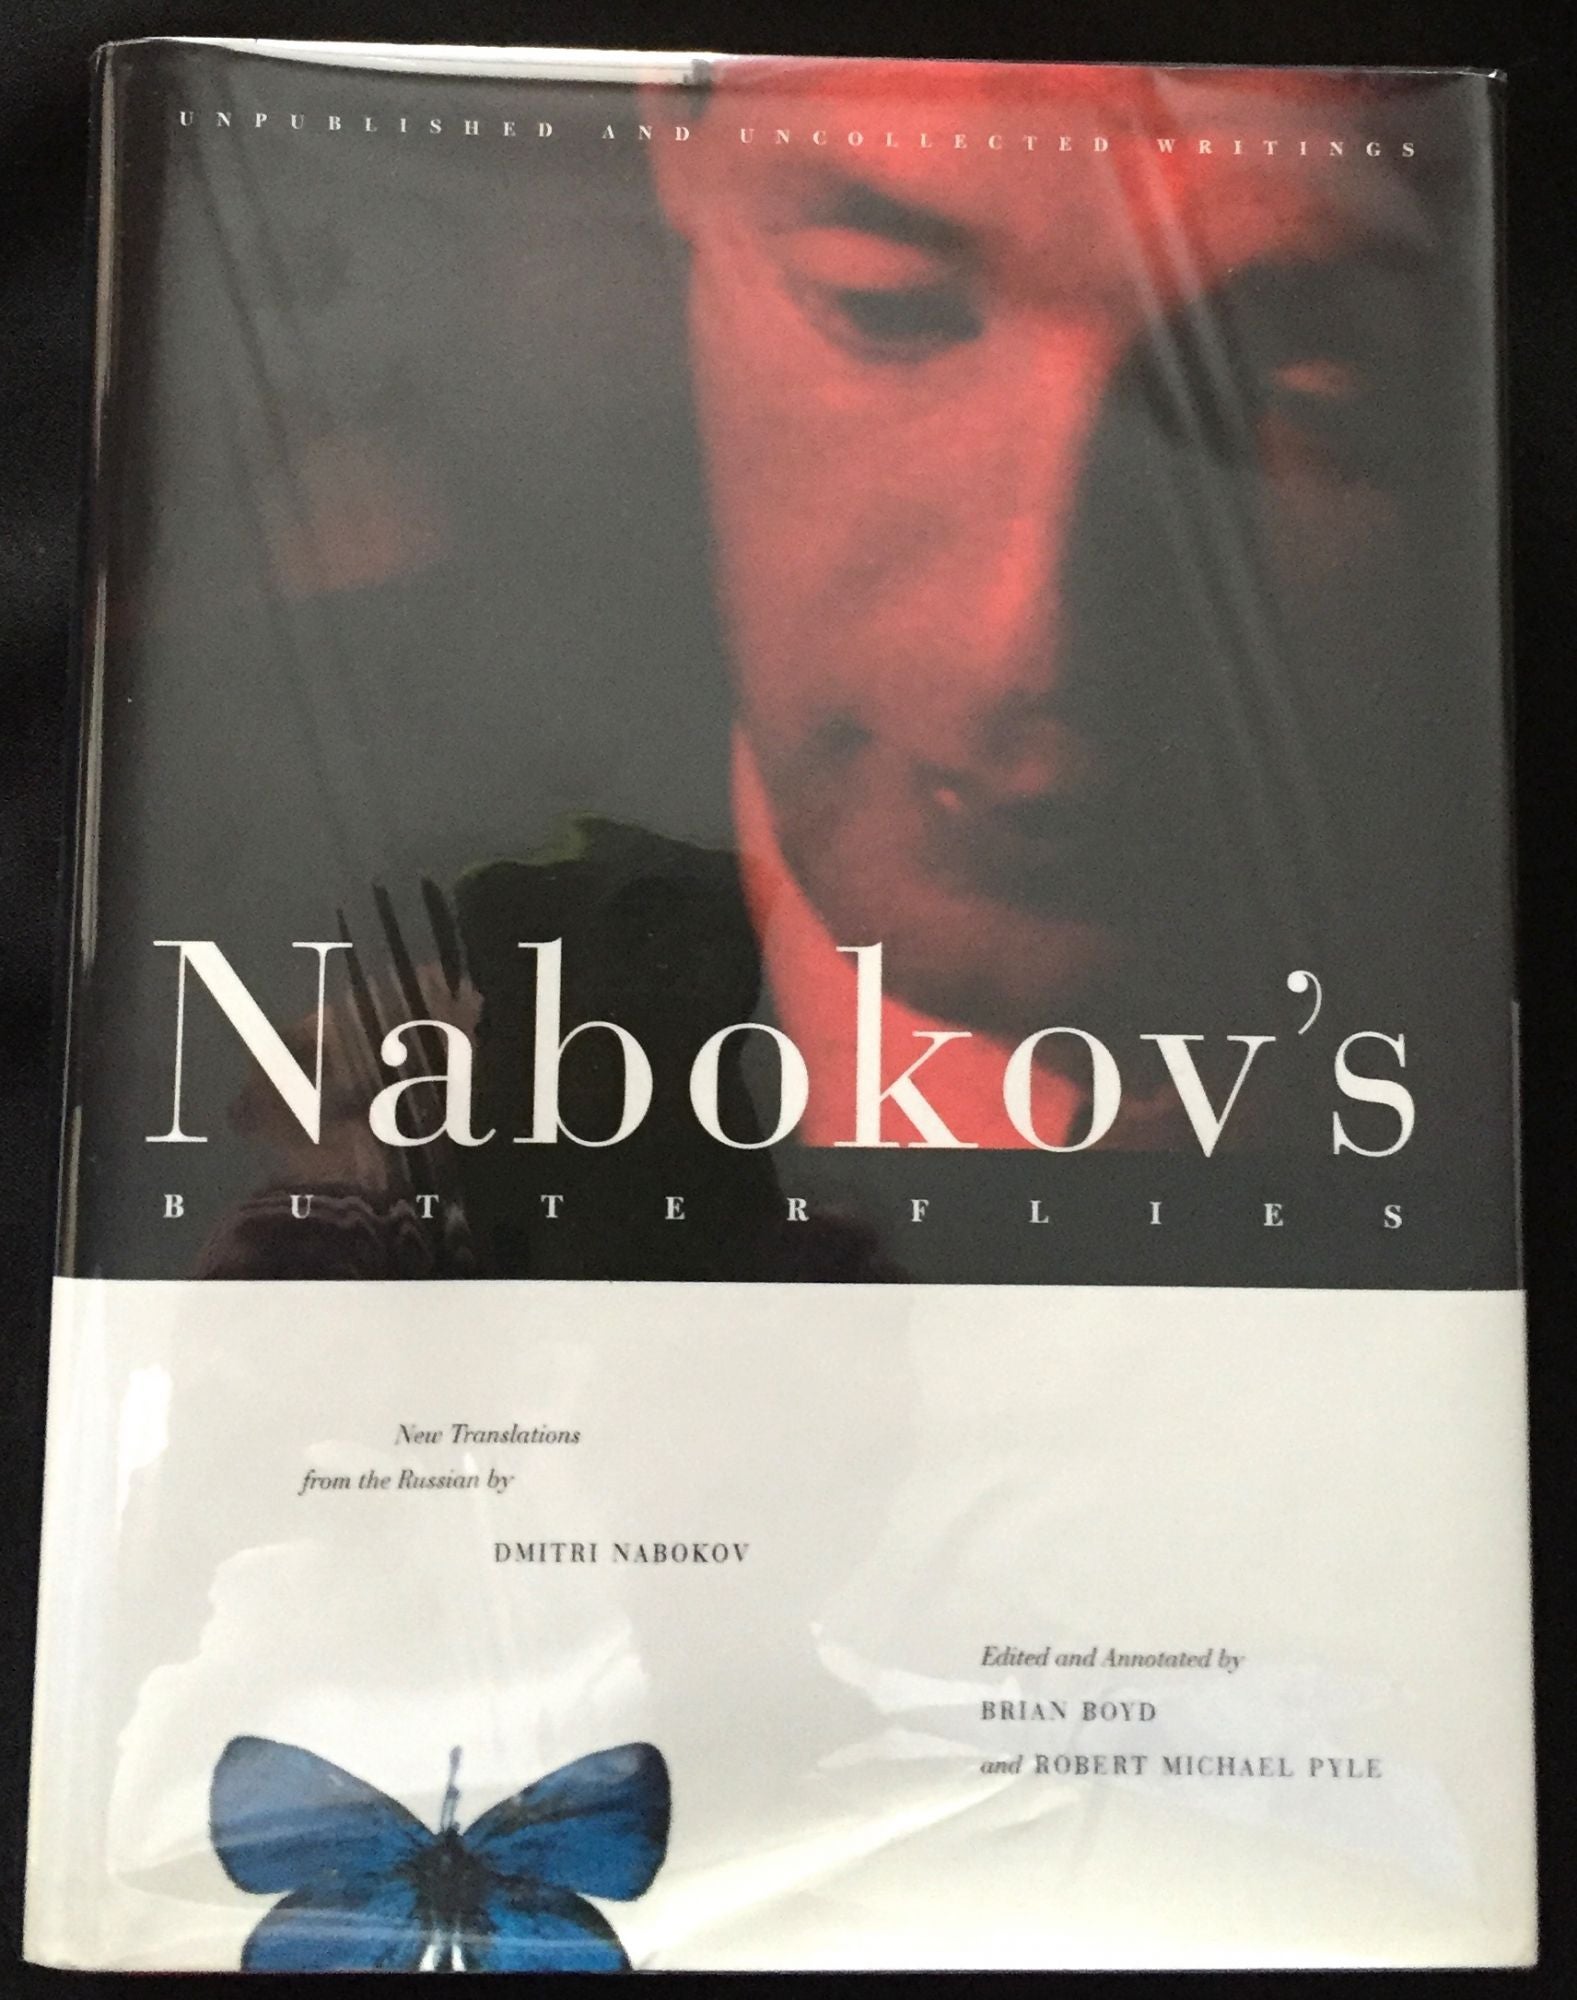 Lectures on Literature by Vladimir Nabokov